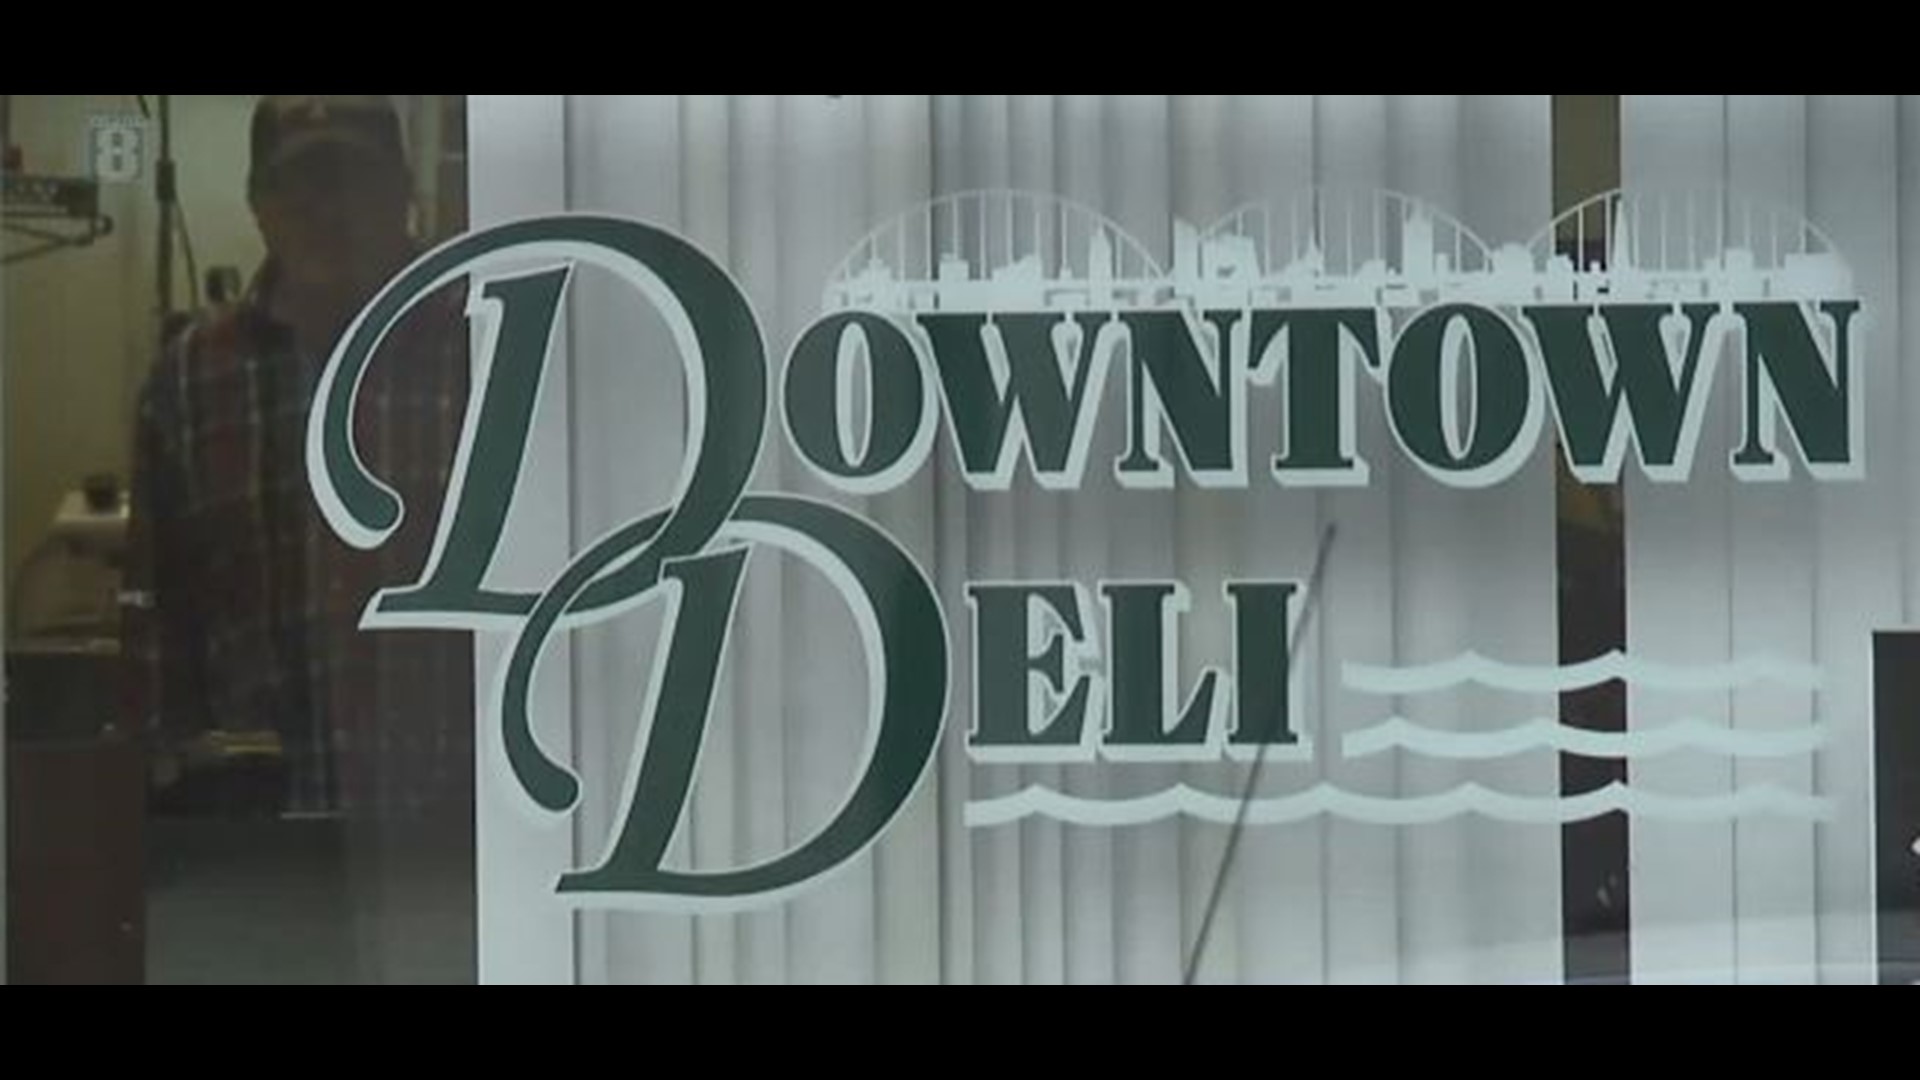 Downtown Deli closing after nearly 20 years